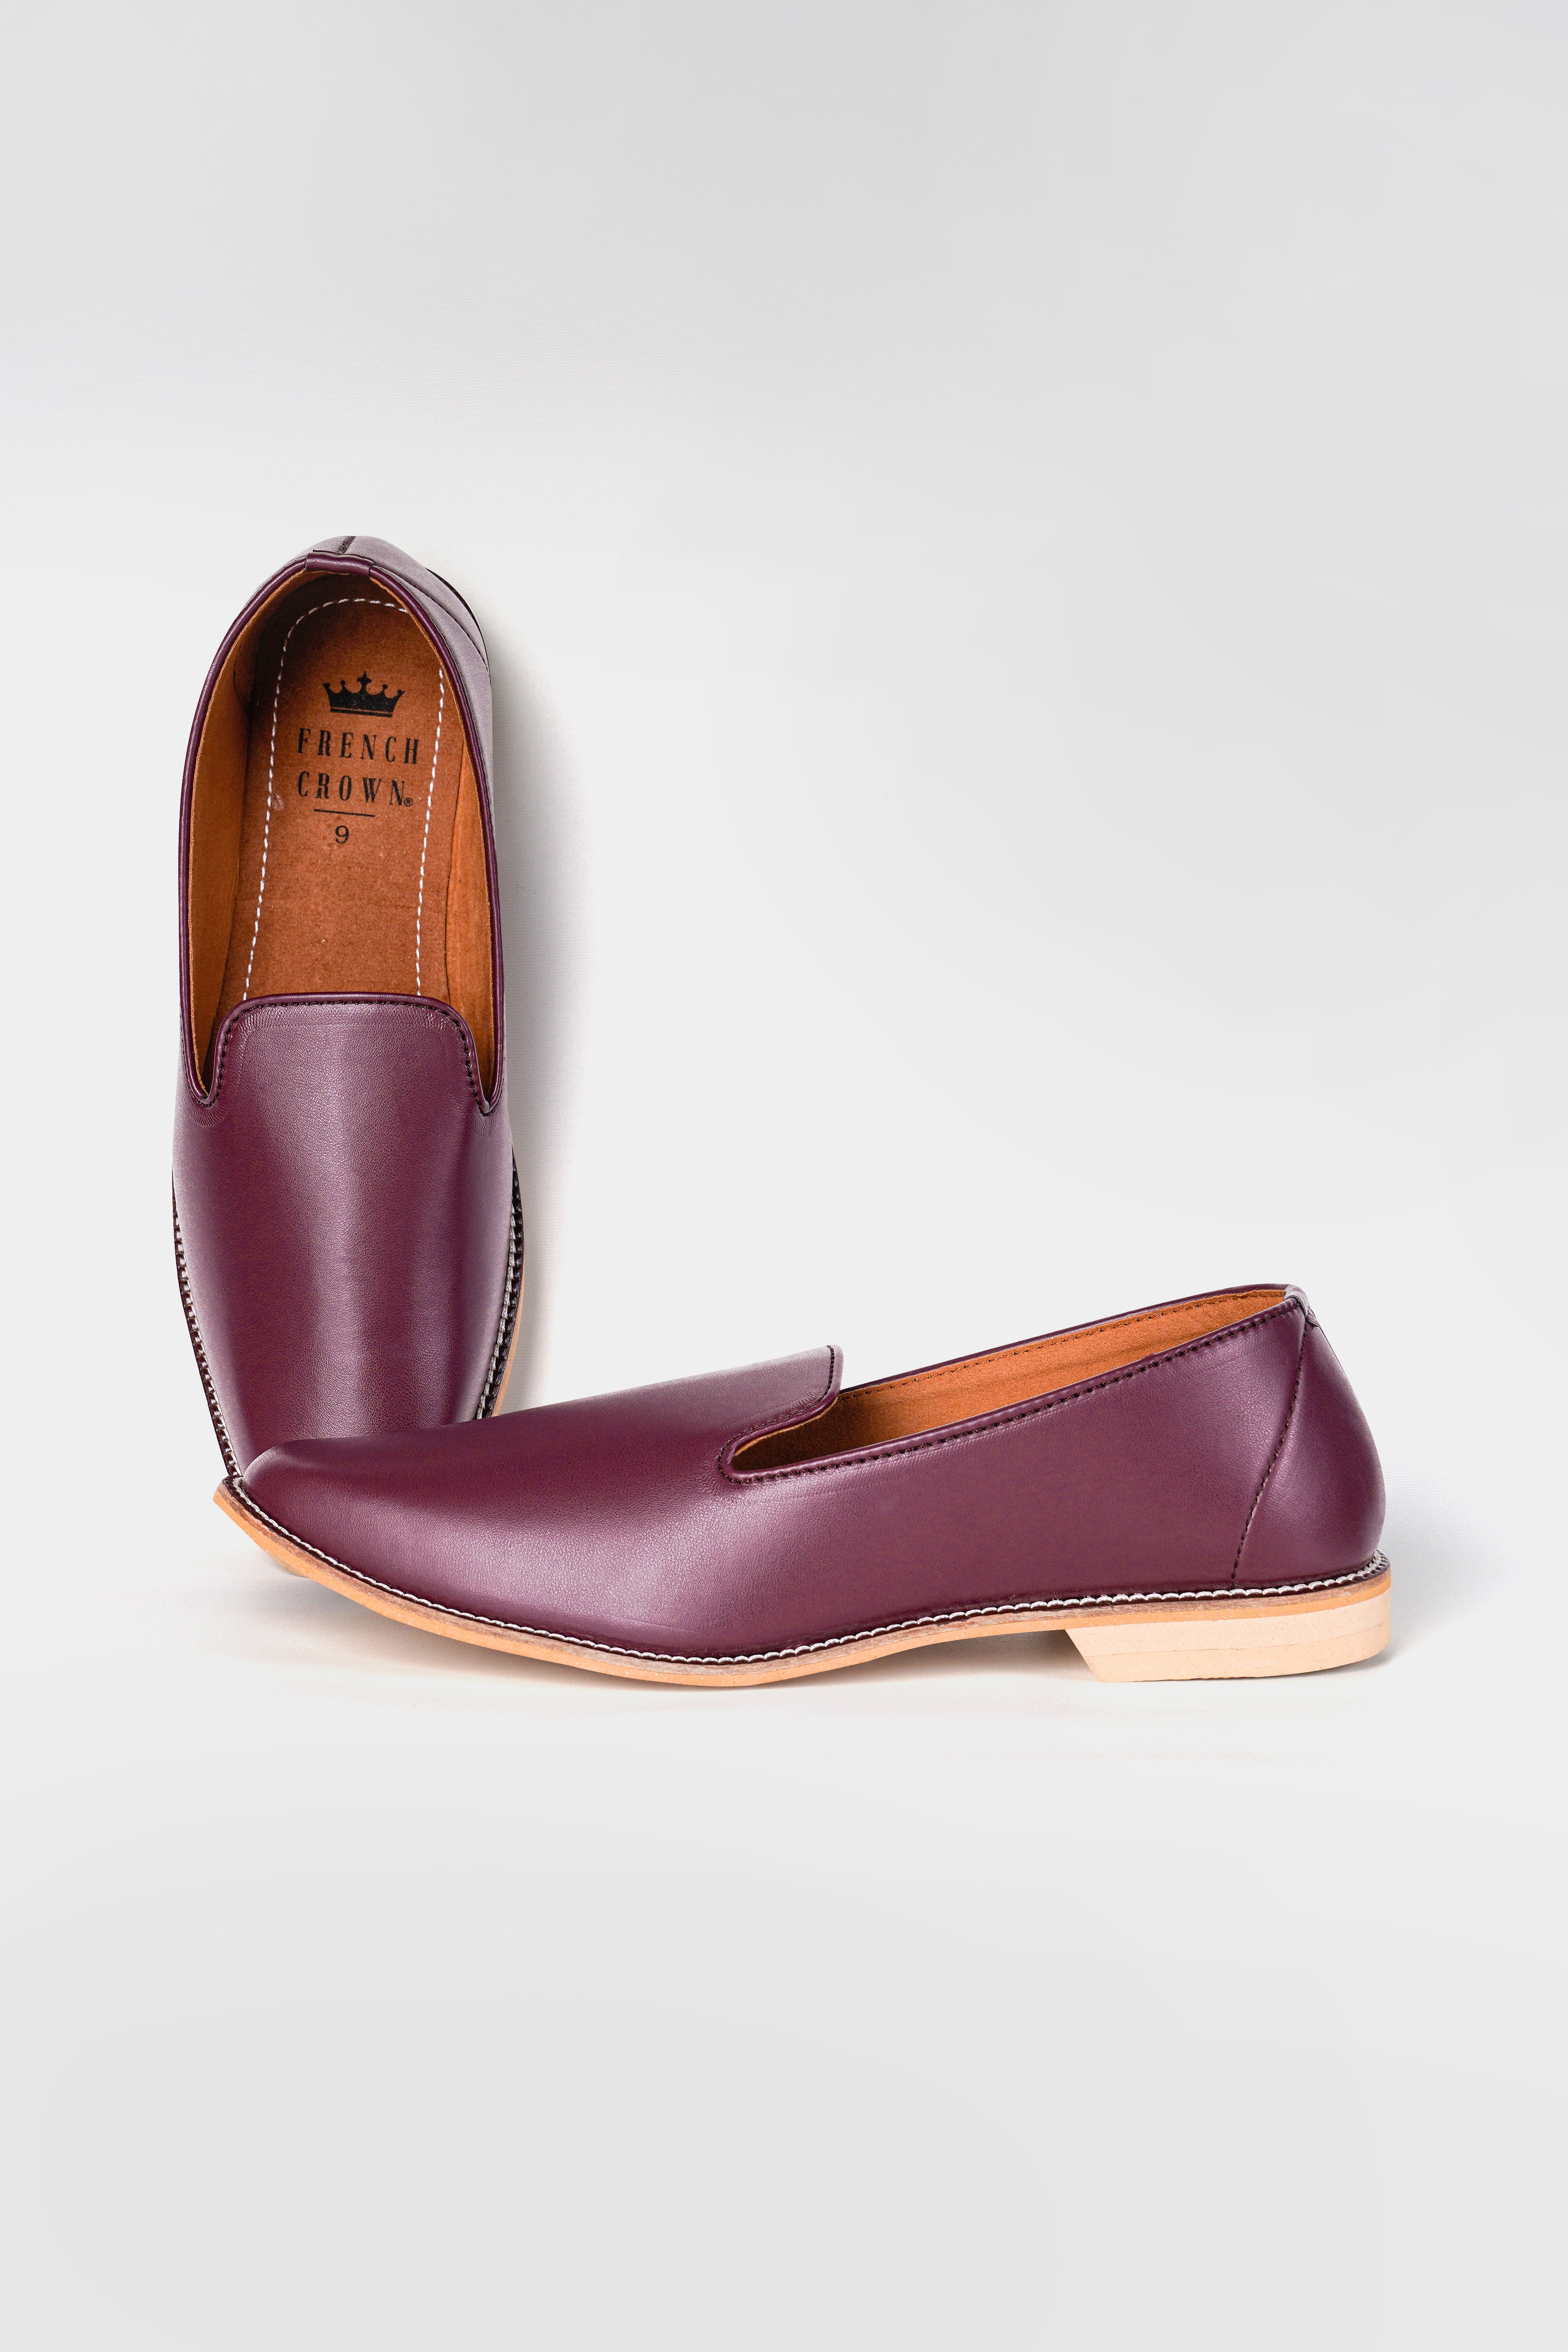 Wine Vegan Leather Hand Stitched Mojri Slip-On Shoes FT141-6, FT141-7, FT141-8, FT141-9, FT141-10, FT141-11